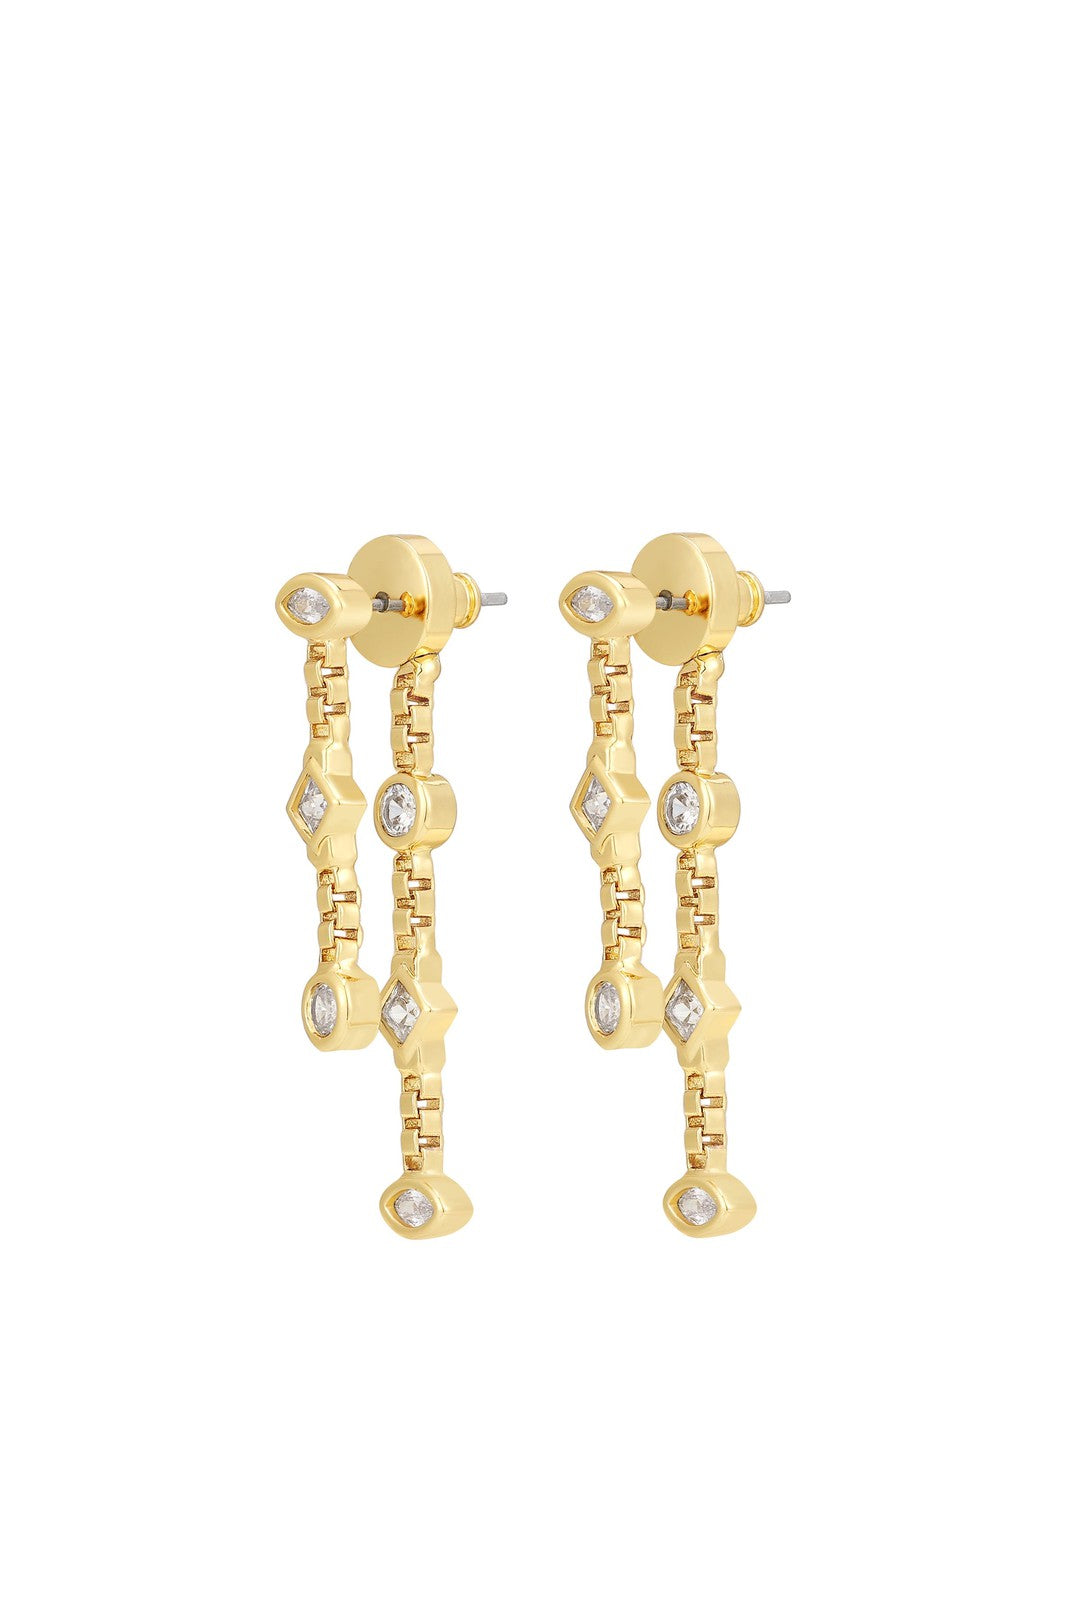 The Camille double chain earrings, gold